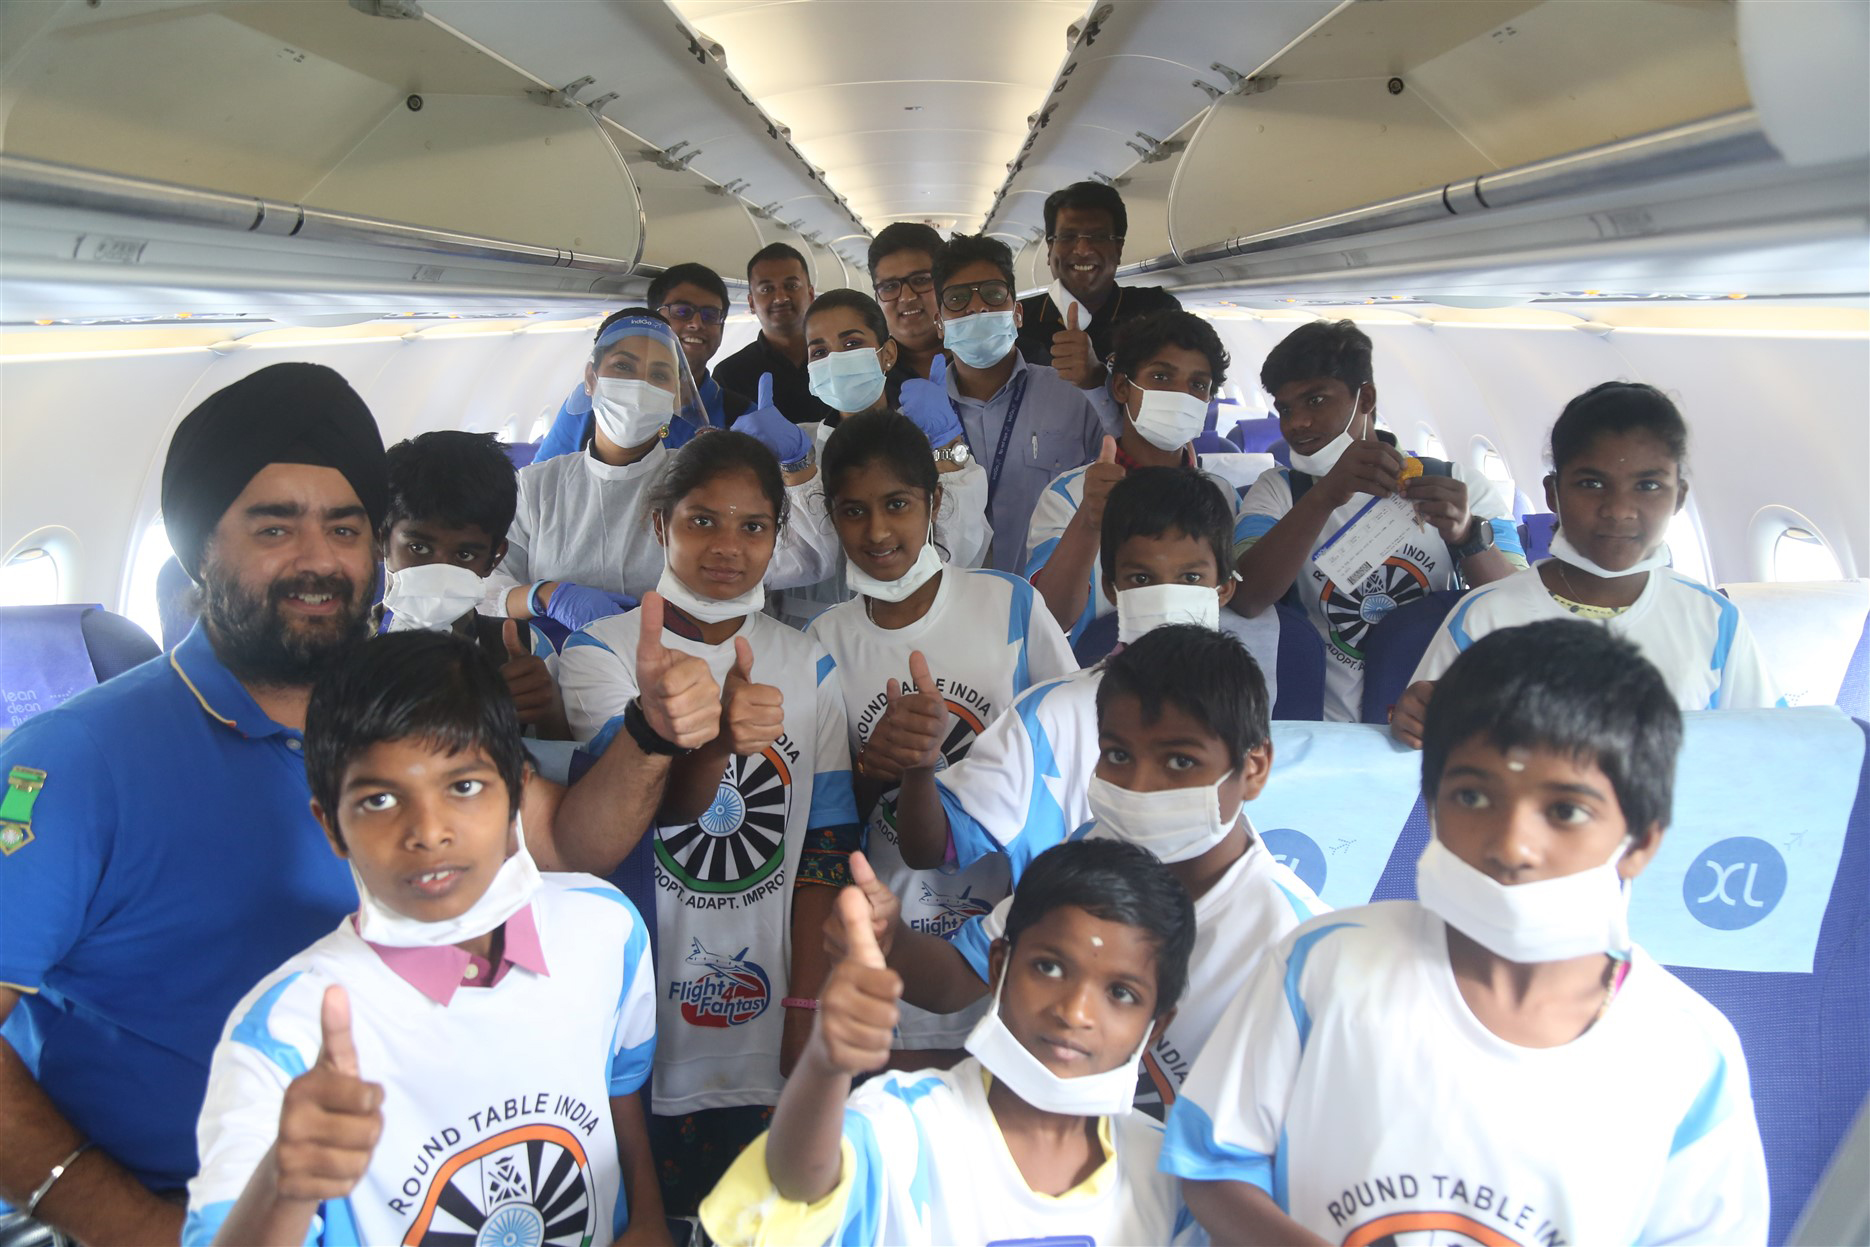 Flight of Fantasy – 15 underprivileged Orphanage kids First time Round trip Flight from coimbatore and Chennai a joint noble initiative by CNRT 20, MART 100 and CNLC 11.